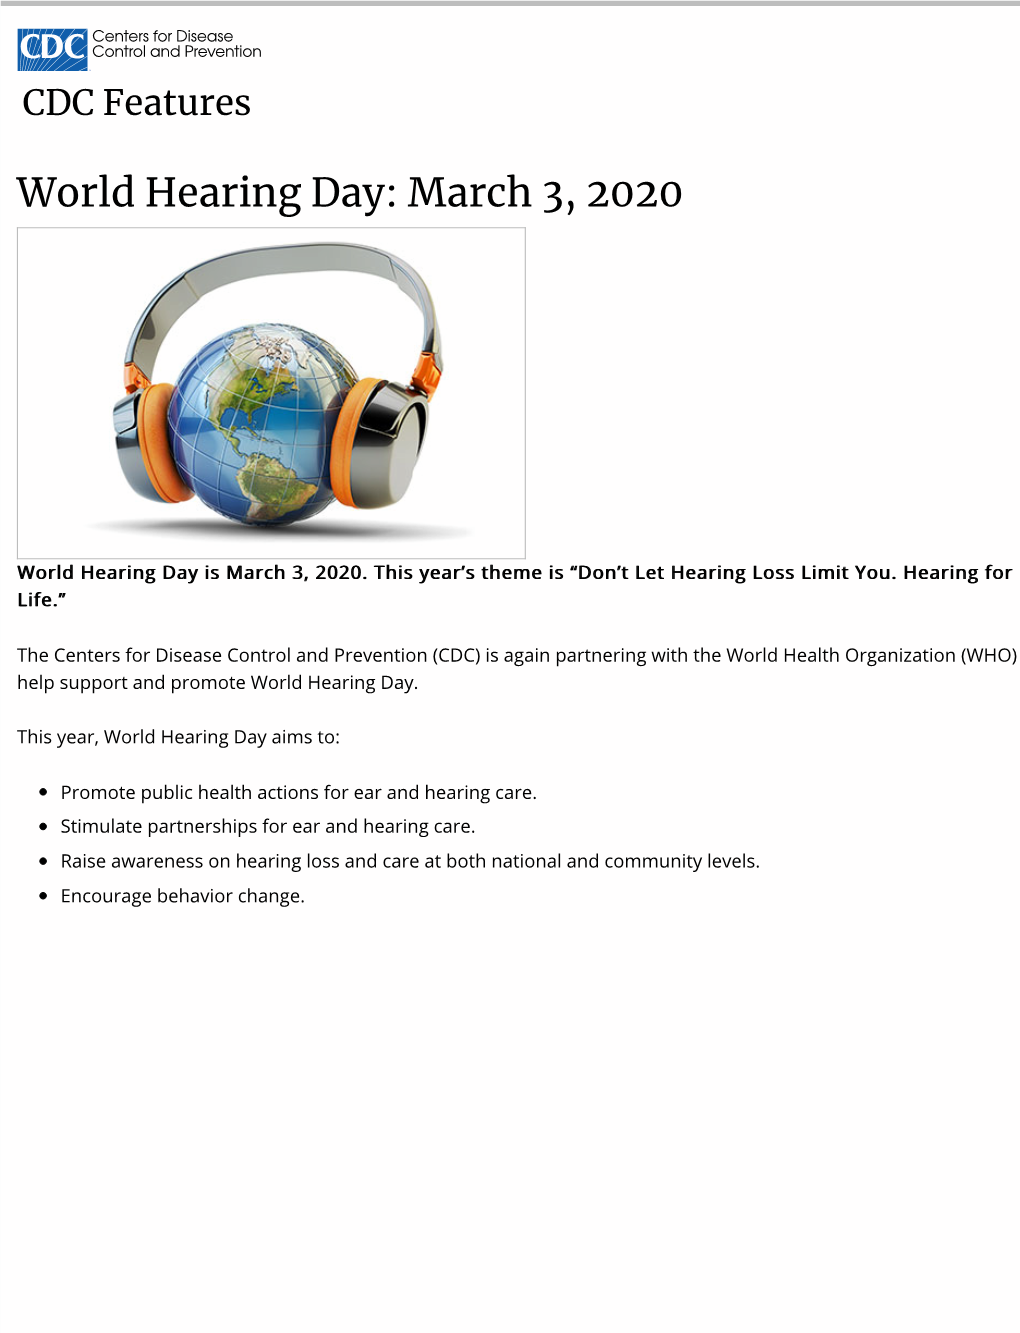 World Hearing Day: March 3, 2020